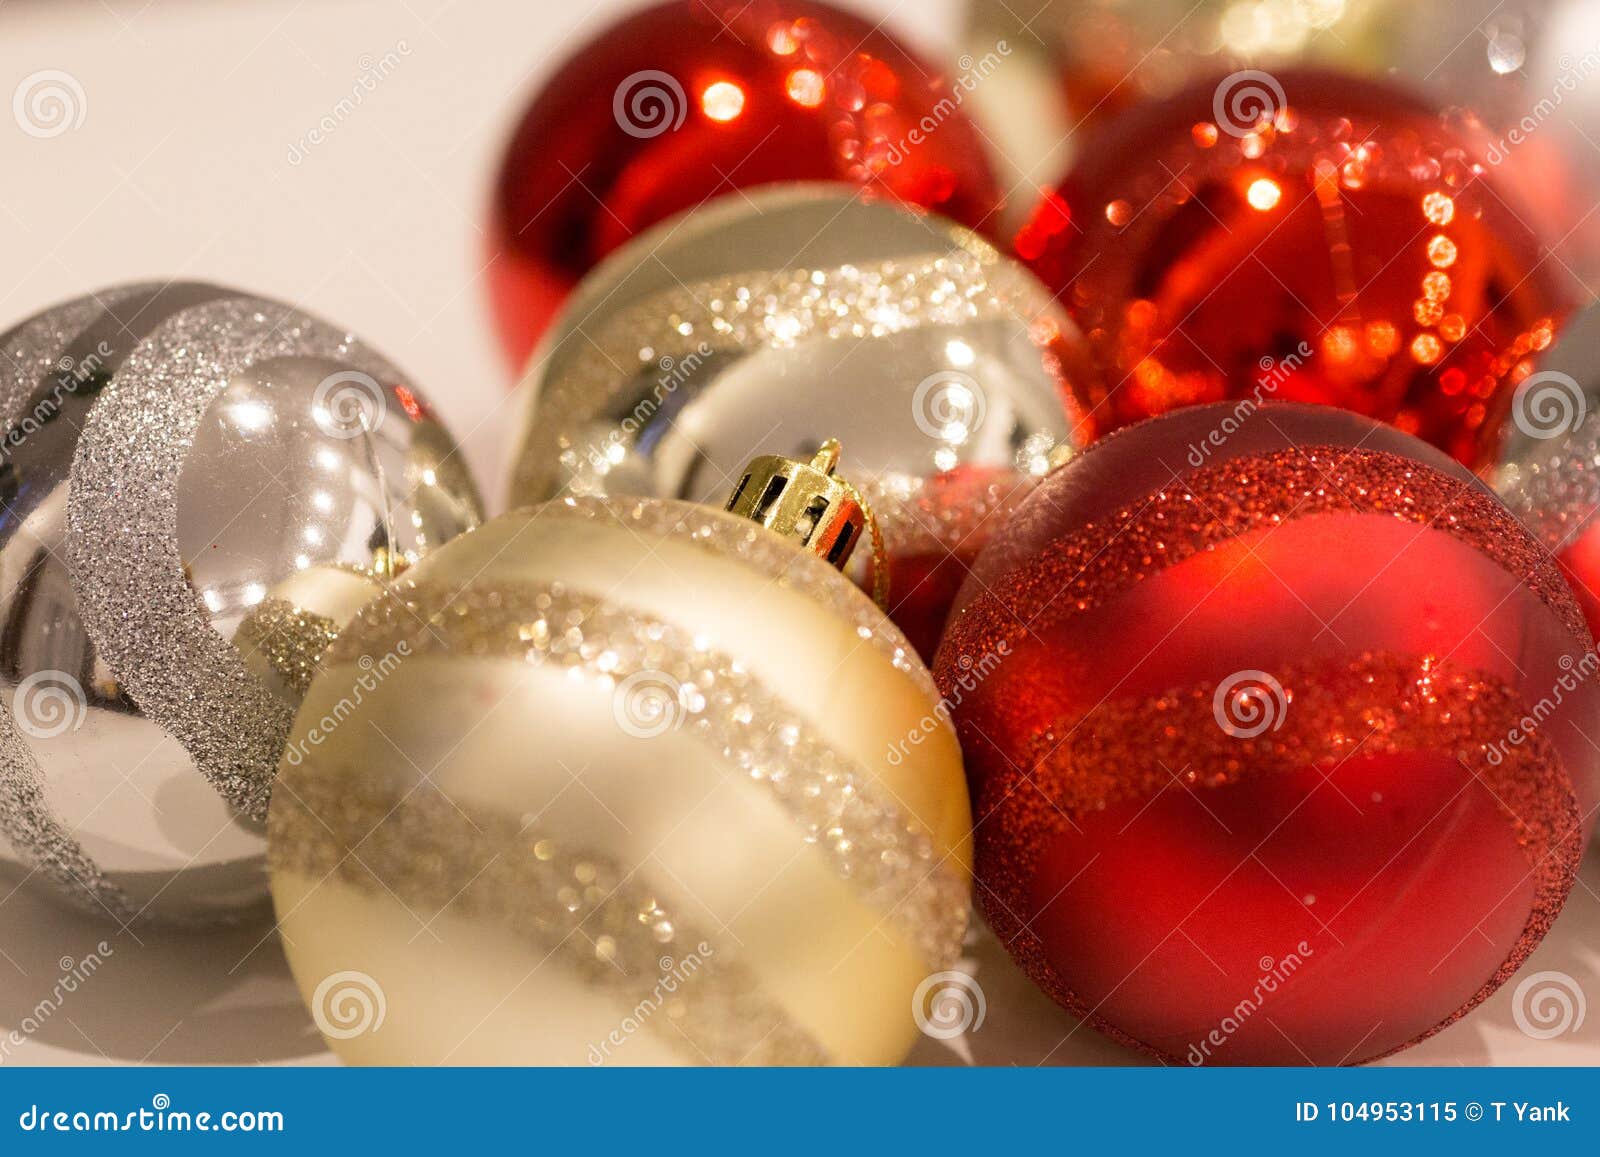 Christmas and new year decoration color balls